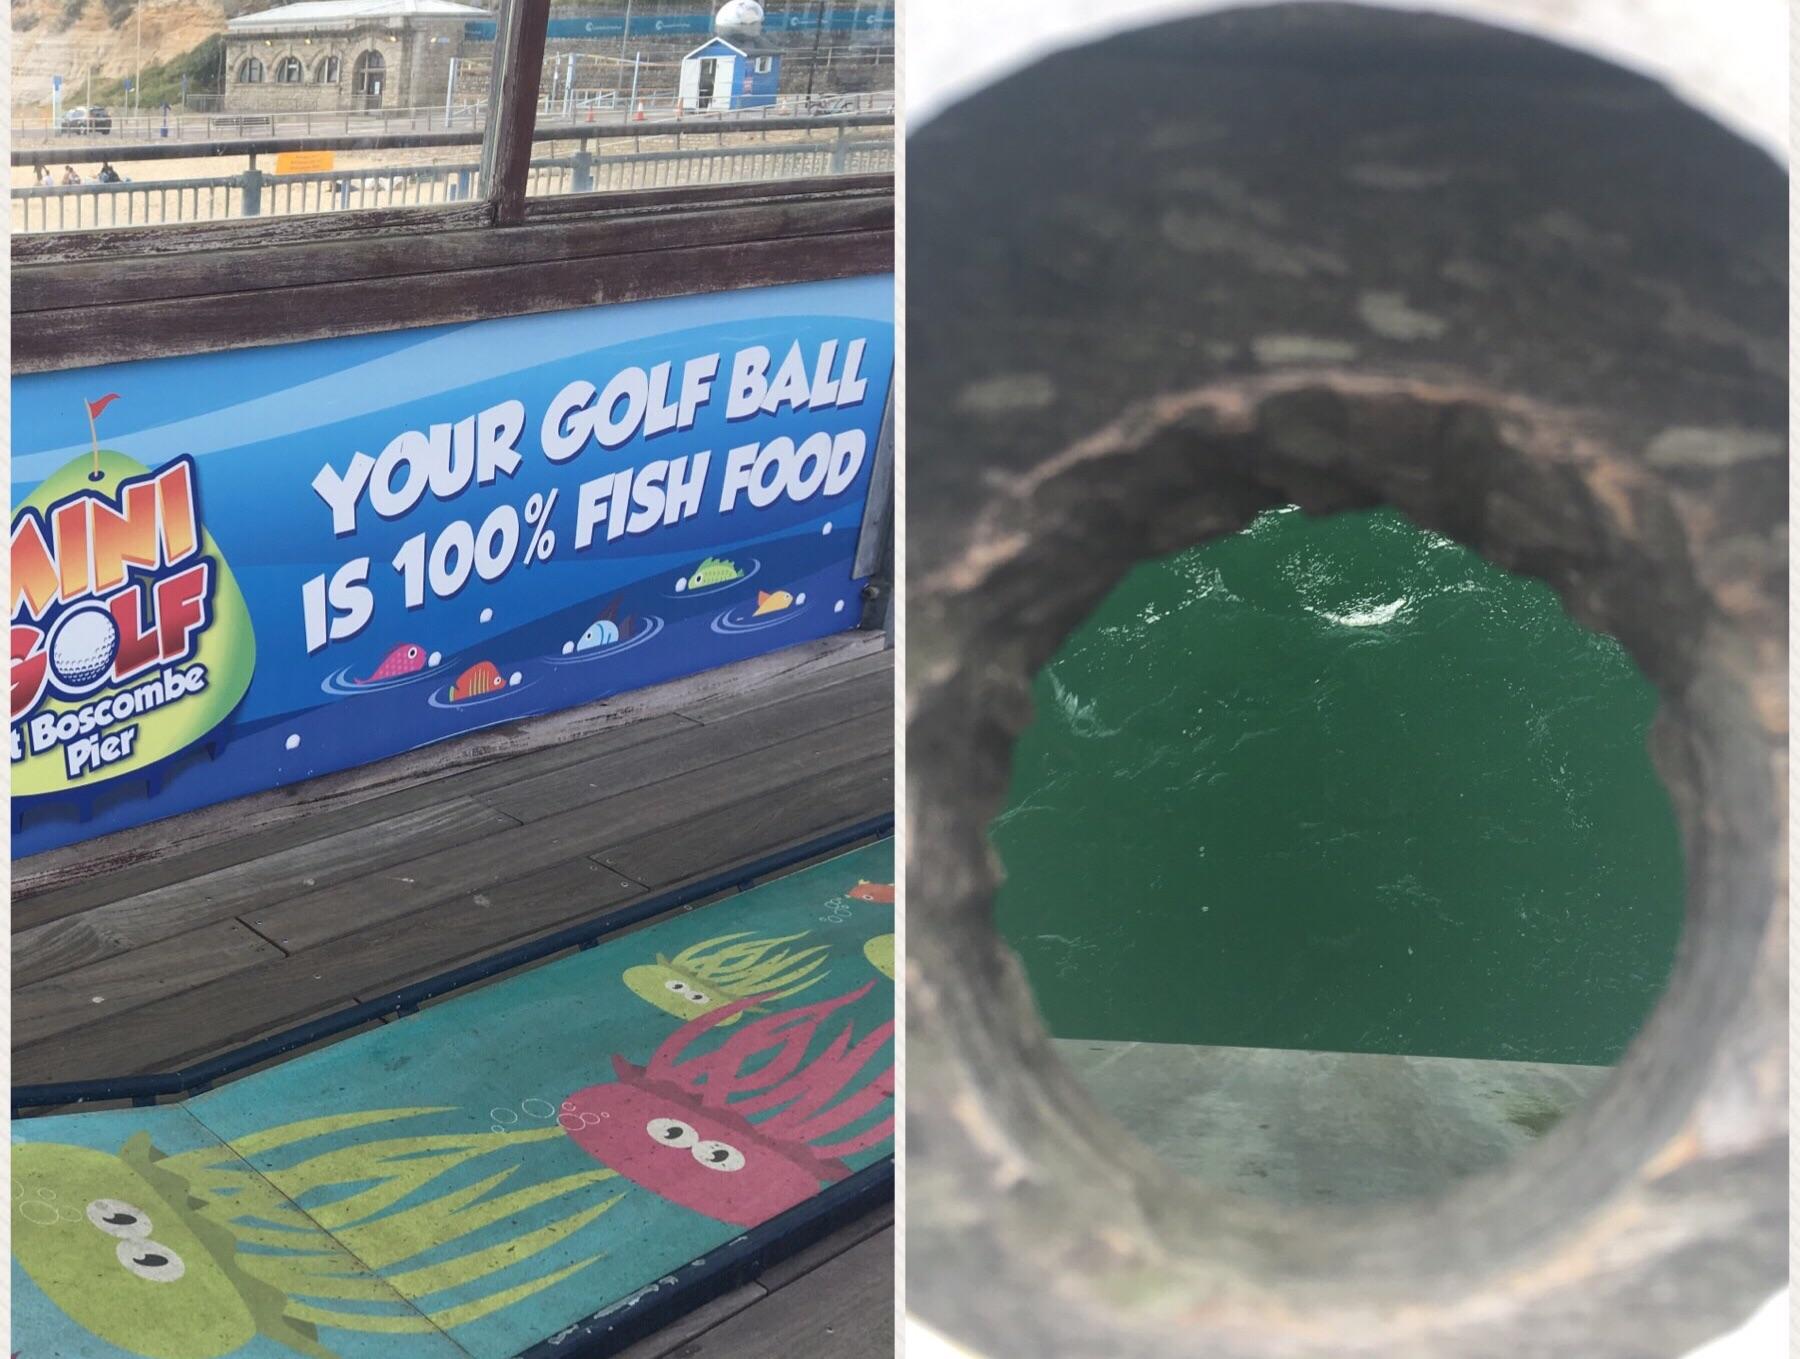 Genius Solutions - boscombe pier mini golf - Wn Your Golf Bay a Is 100% Fish Food Boscombe Pier A 00